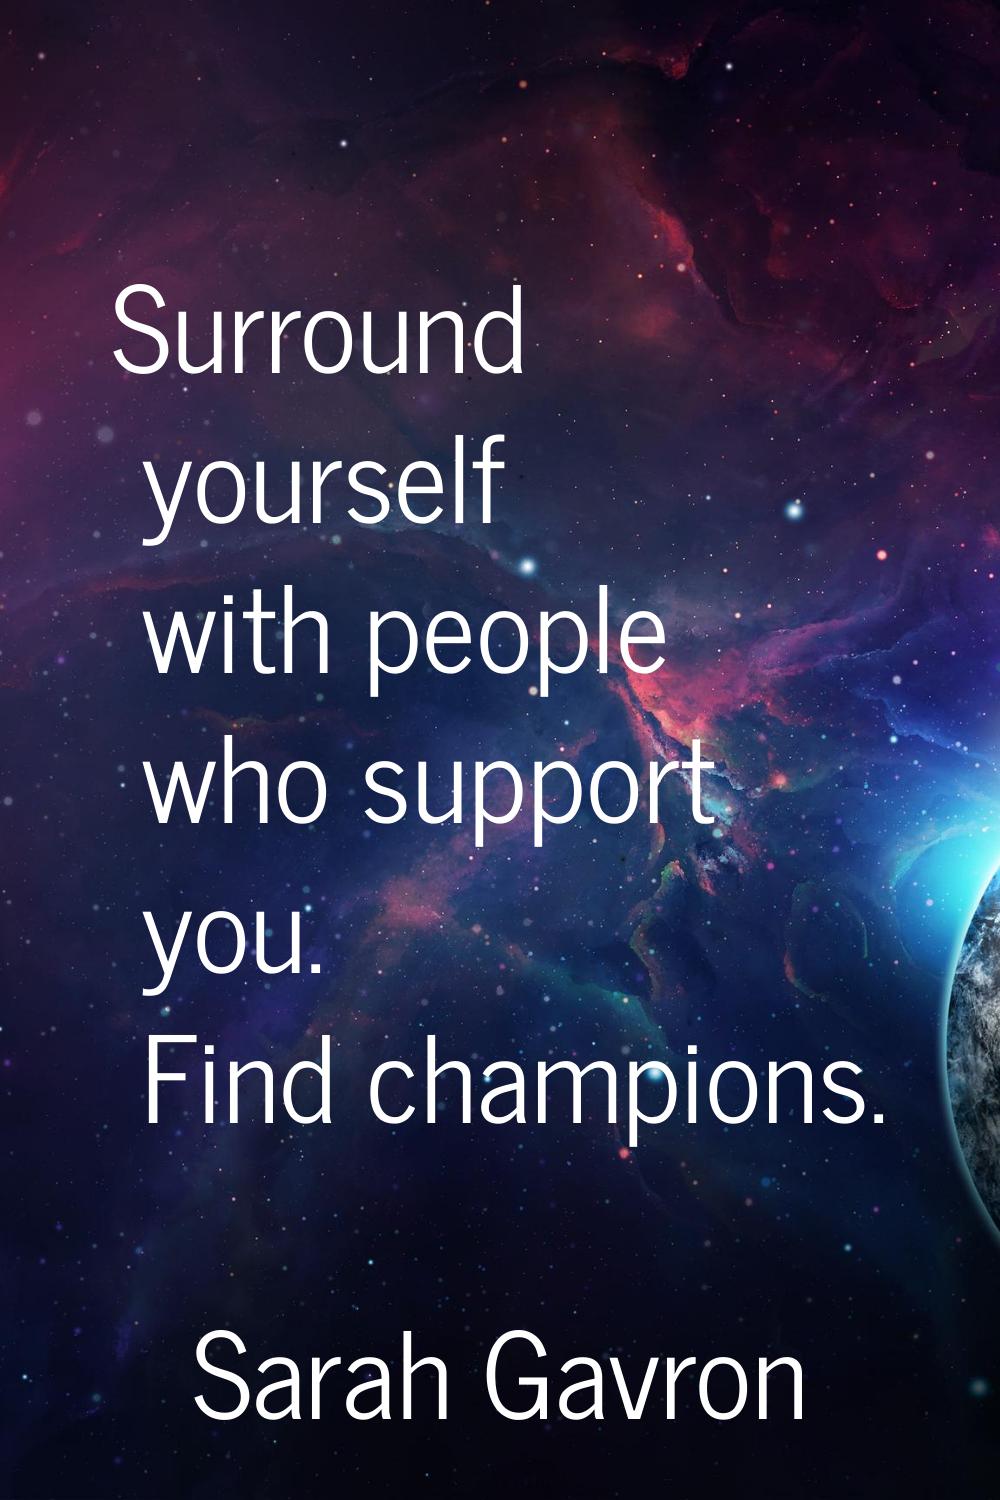 Surround yourself with people who support you. Find champions.